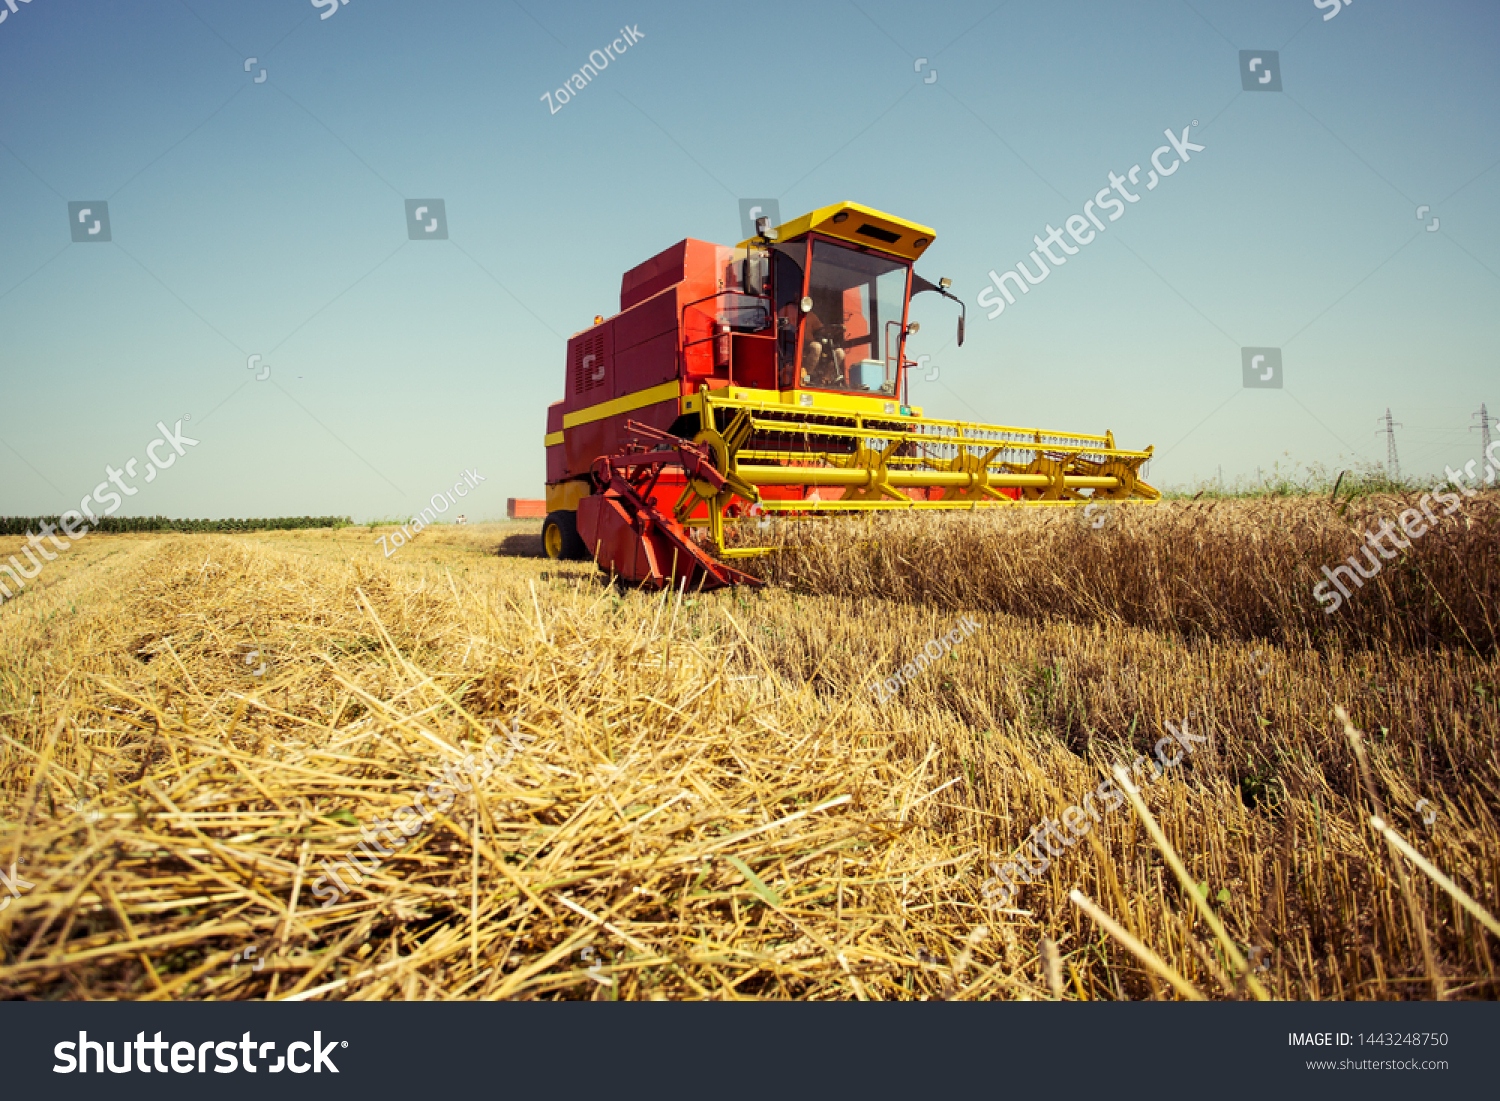 Combine harvesting in a field of golden wheat #1443248750